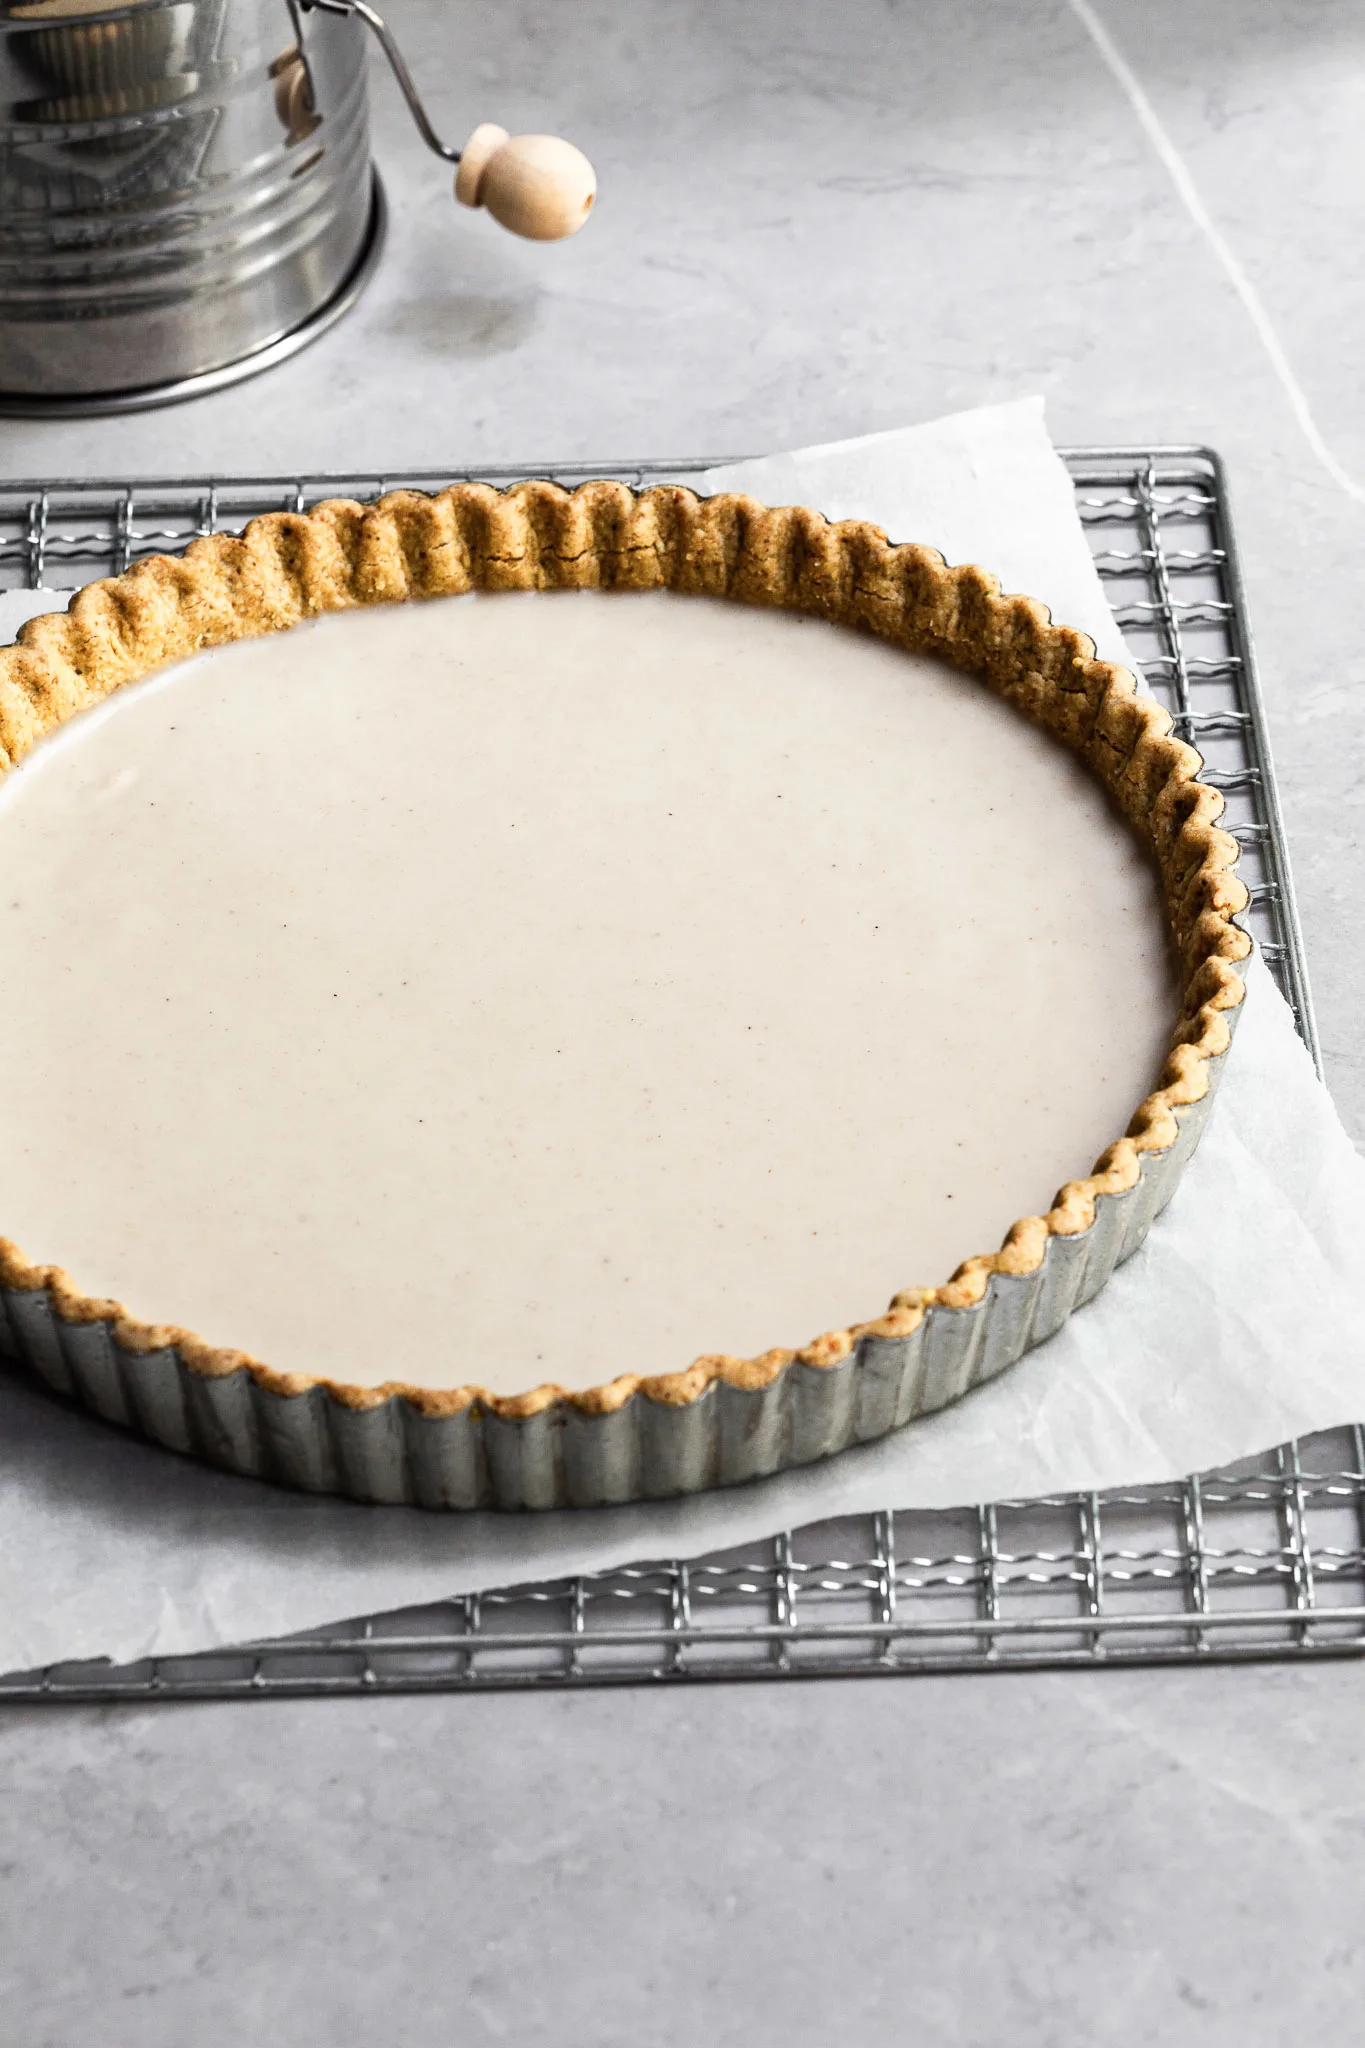 Round tart crust filled with a layer of white chocolate ganache